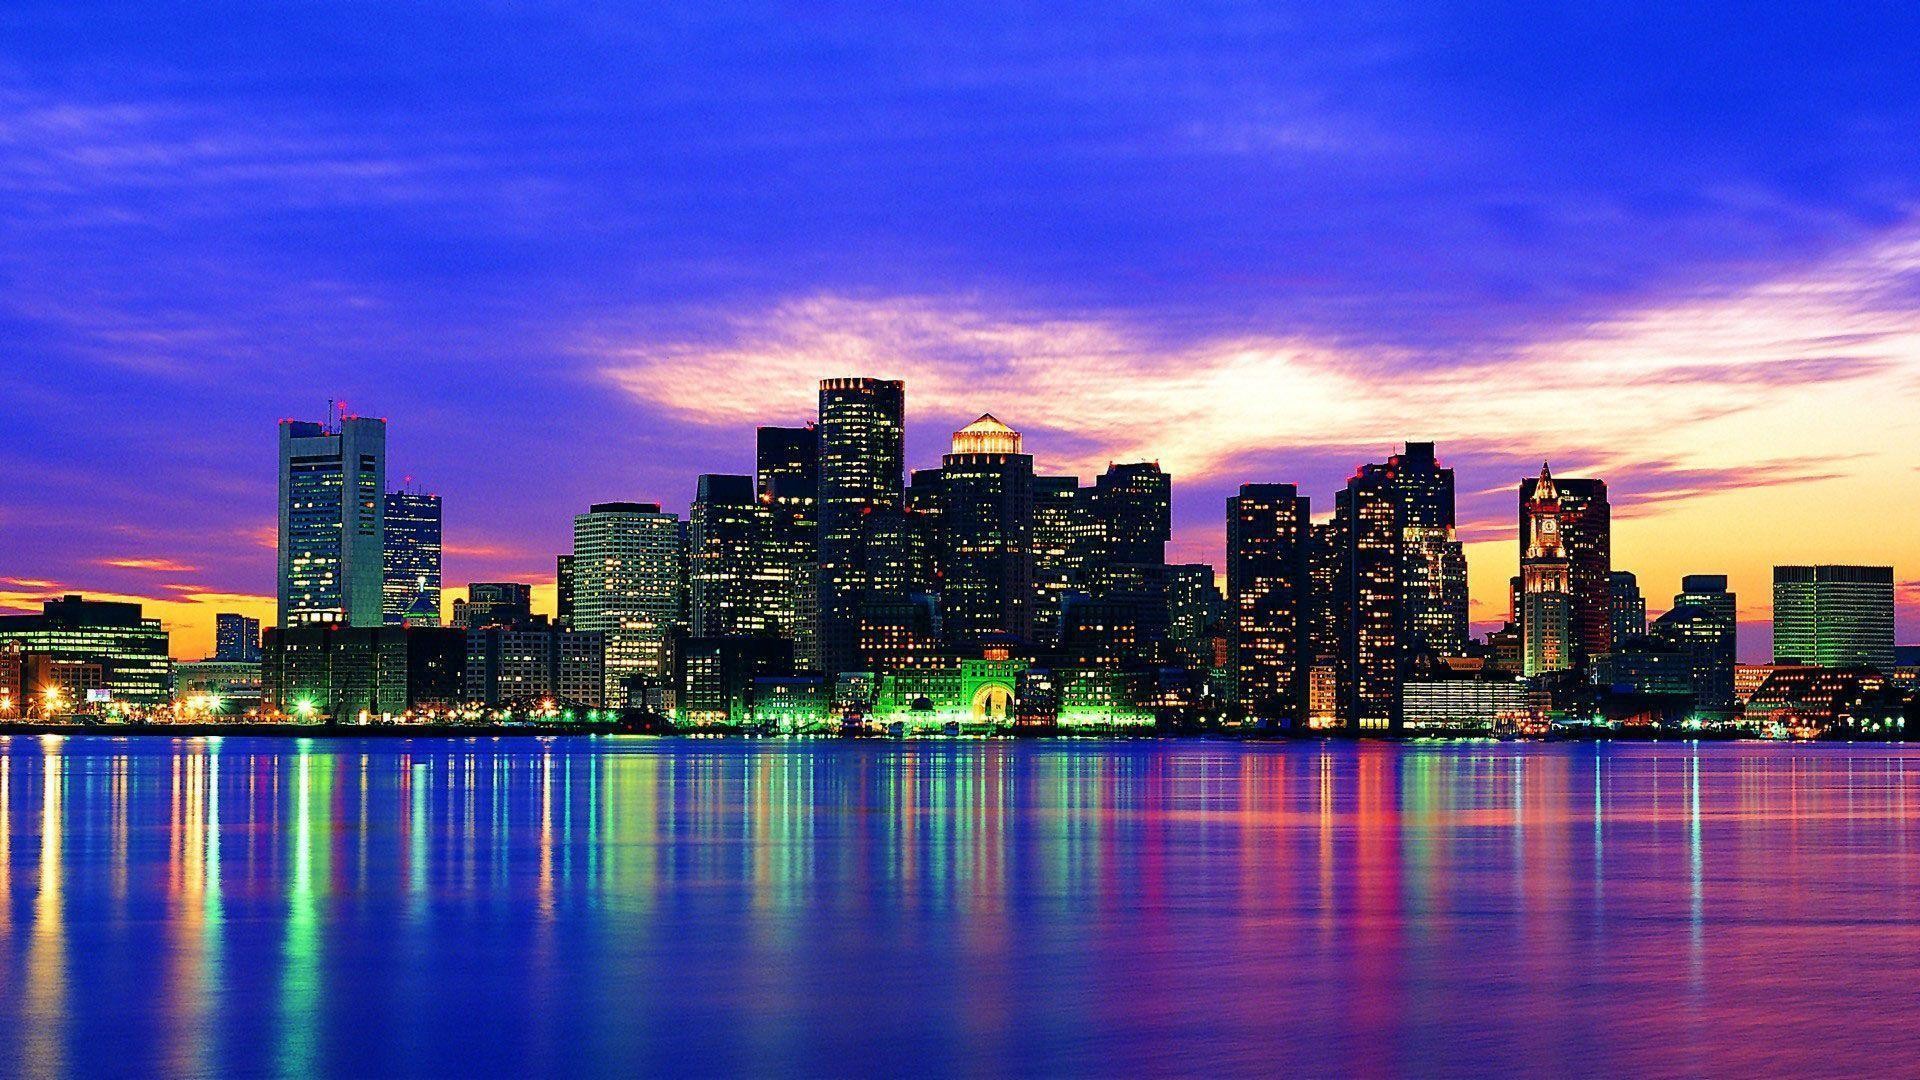 1920x1080 New York City Skyline at Night Wallpaper Wide or HD | Photography .